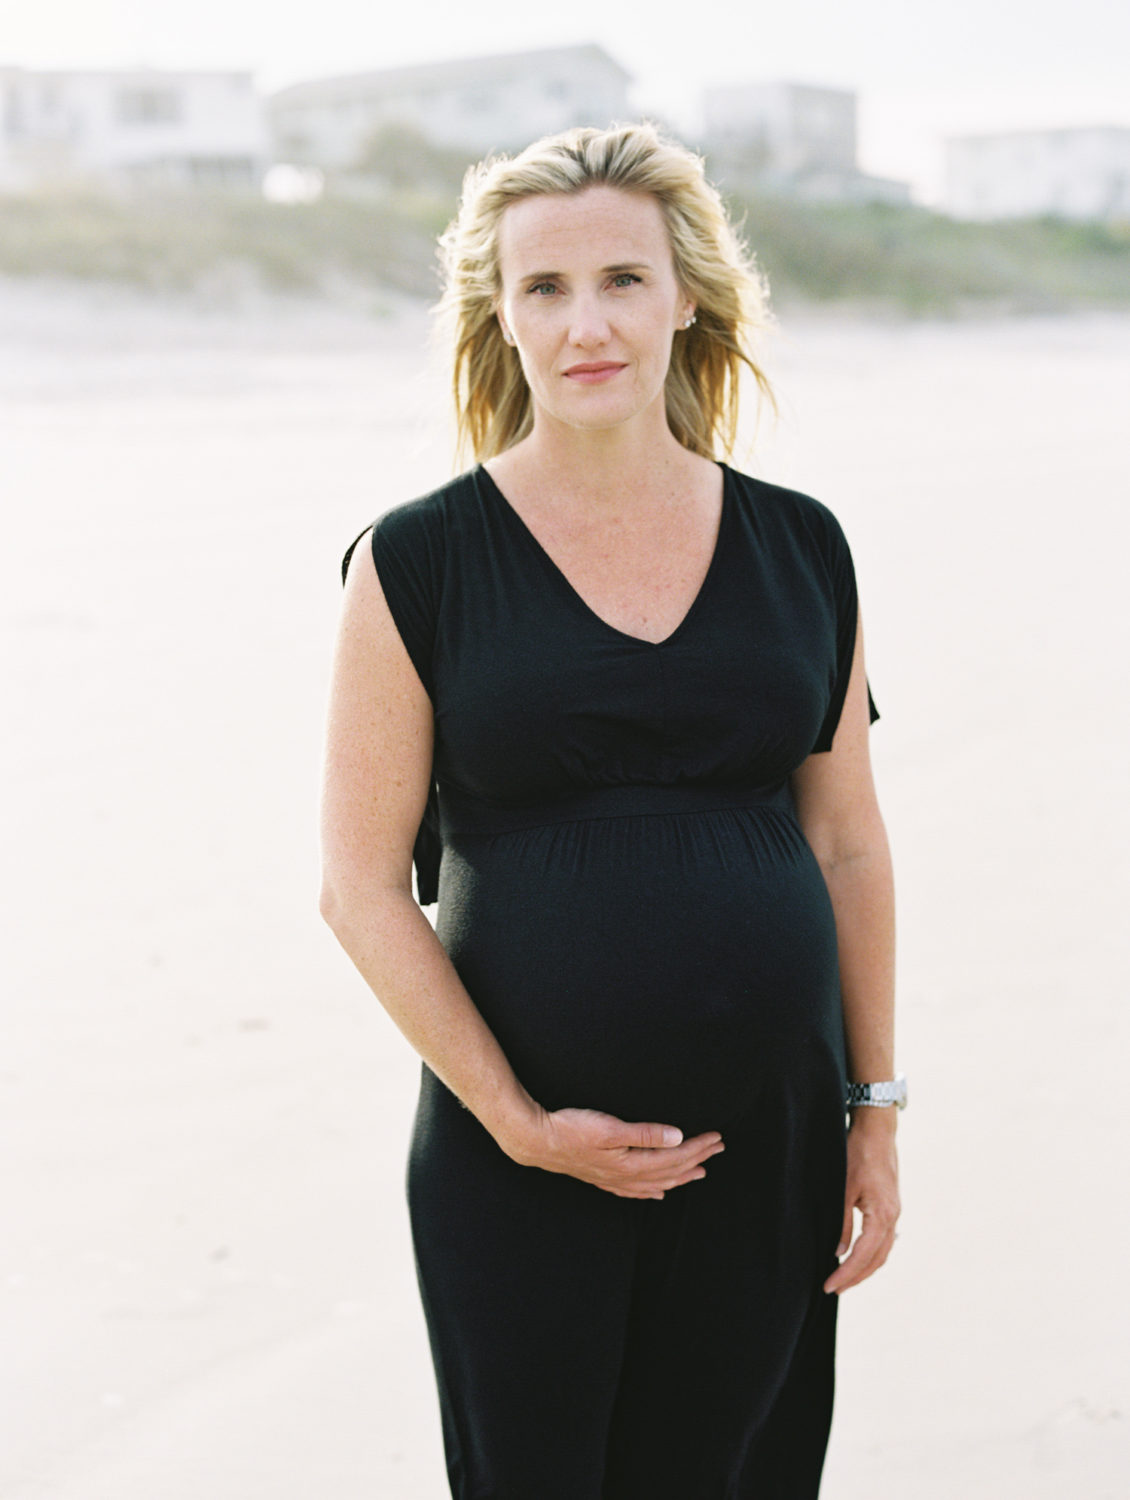 woman with blonde hair and blue eyes in a black maxi dress looking at the camera with a serious expression and holding her pregnant belly with one hand